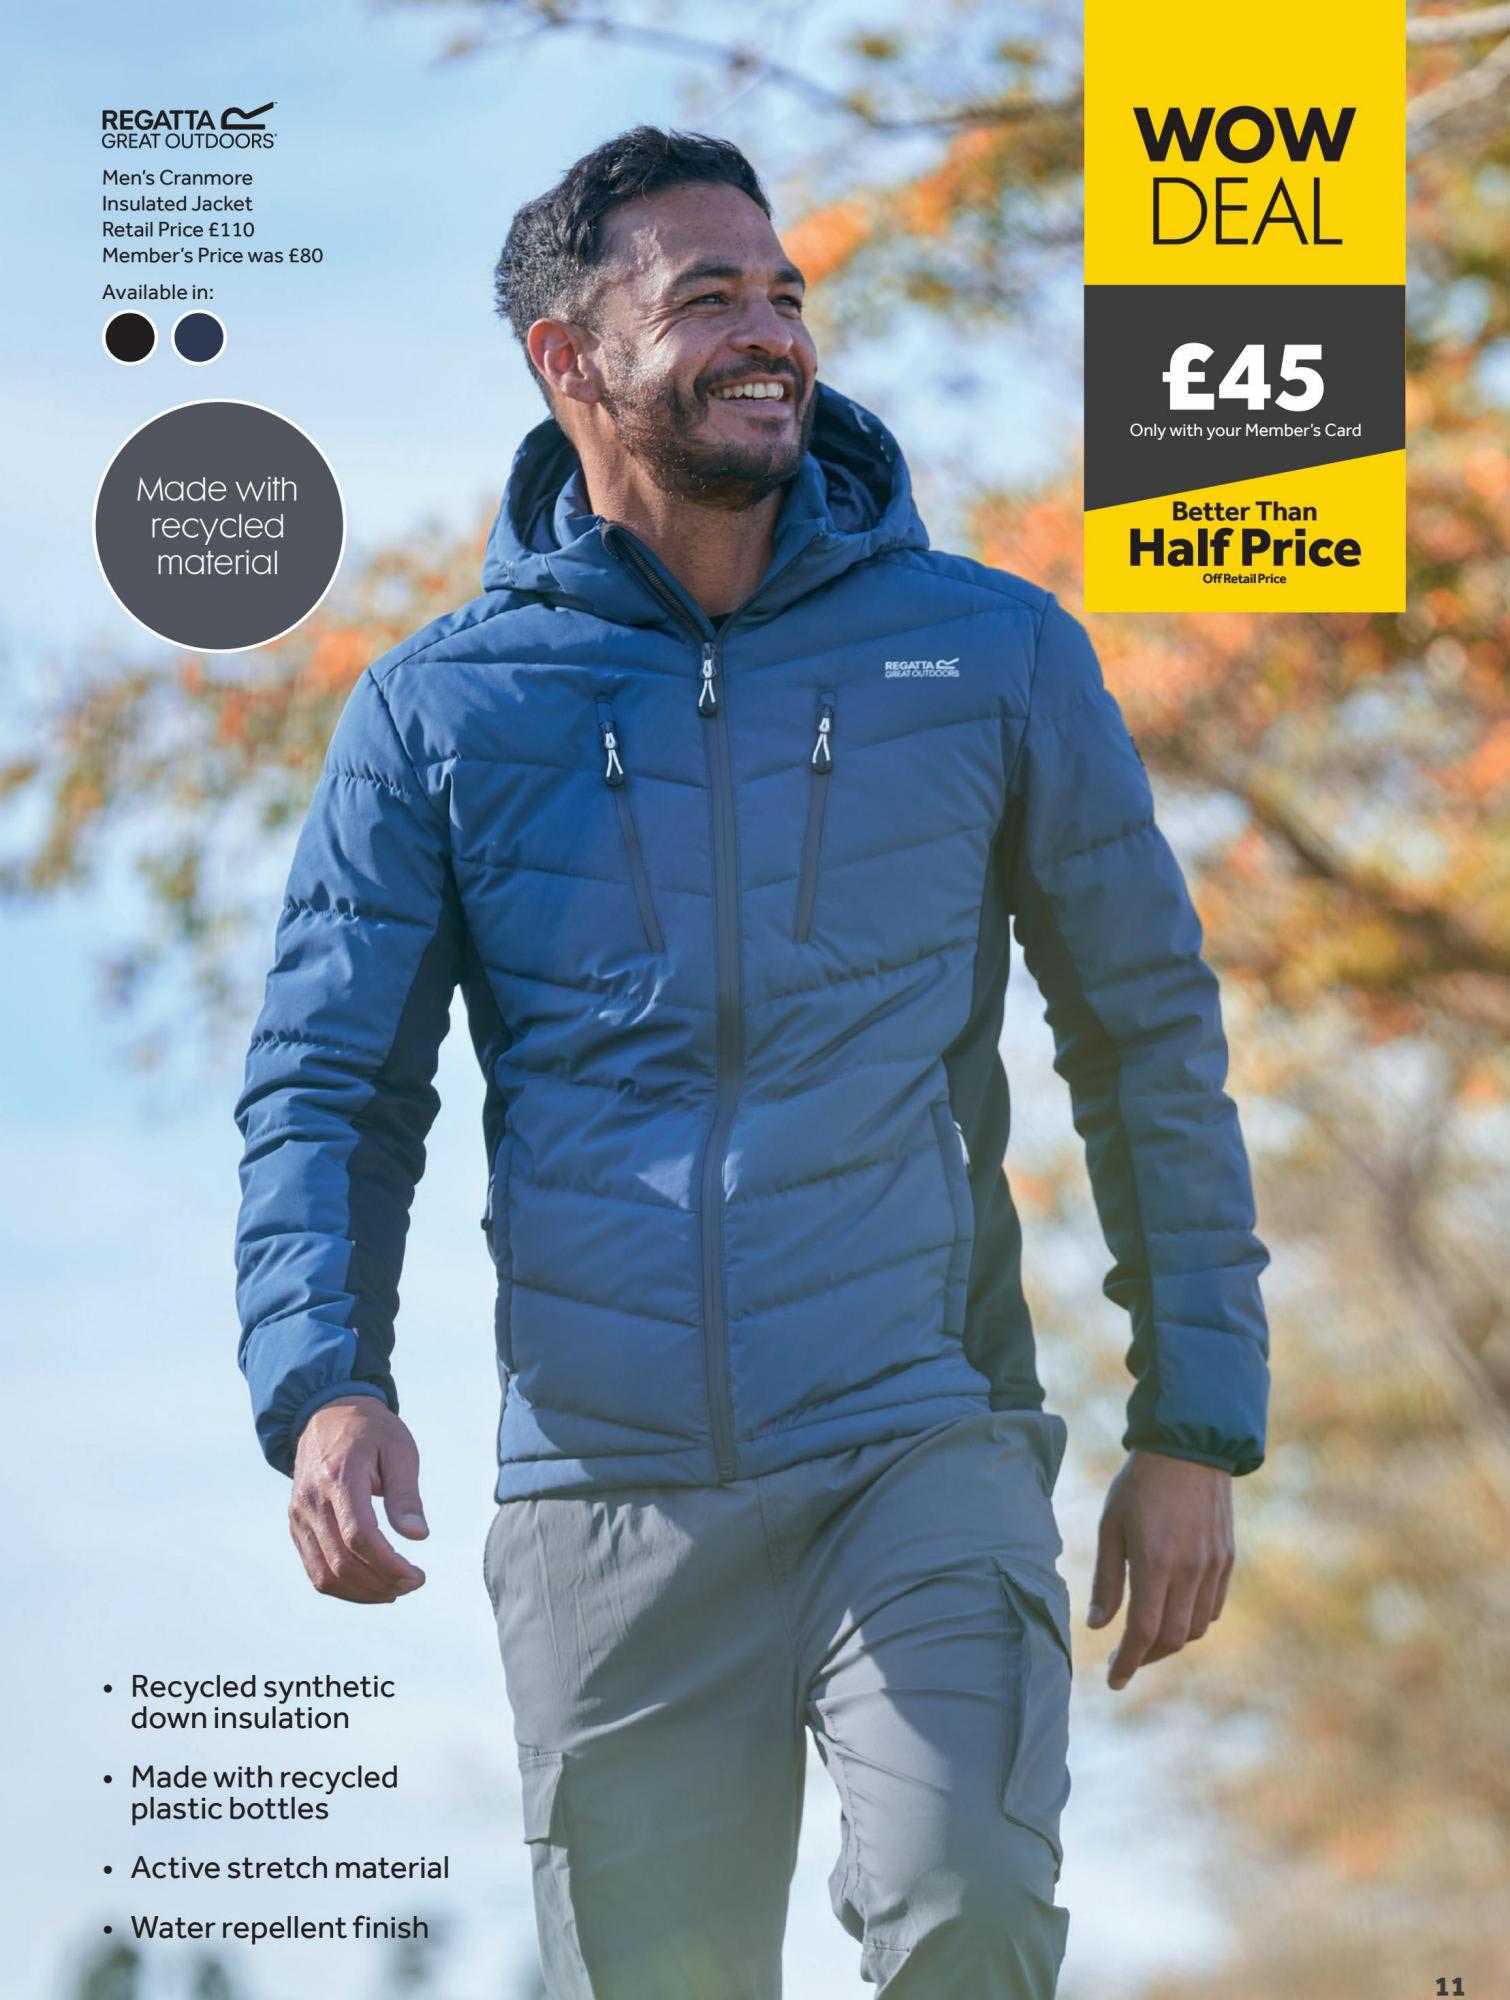 Regatta Men's Cranmore Insulated Jacket Offer at GO Outdoors - 1Offers ...